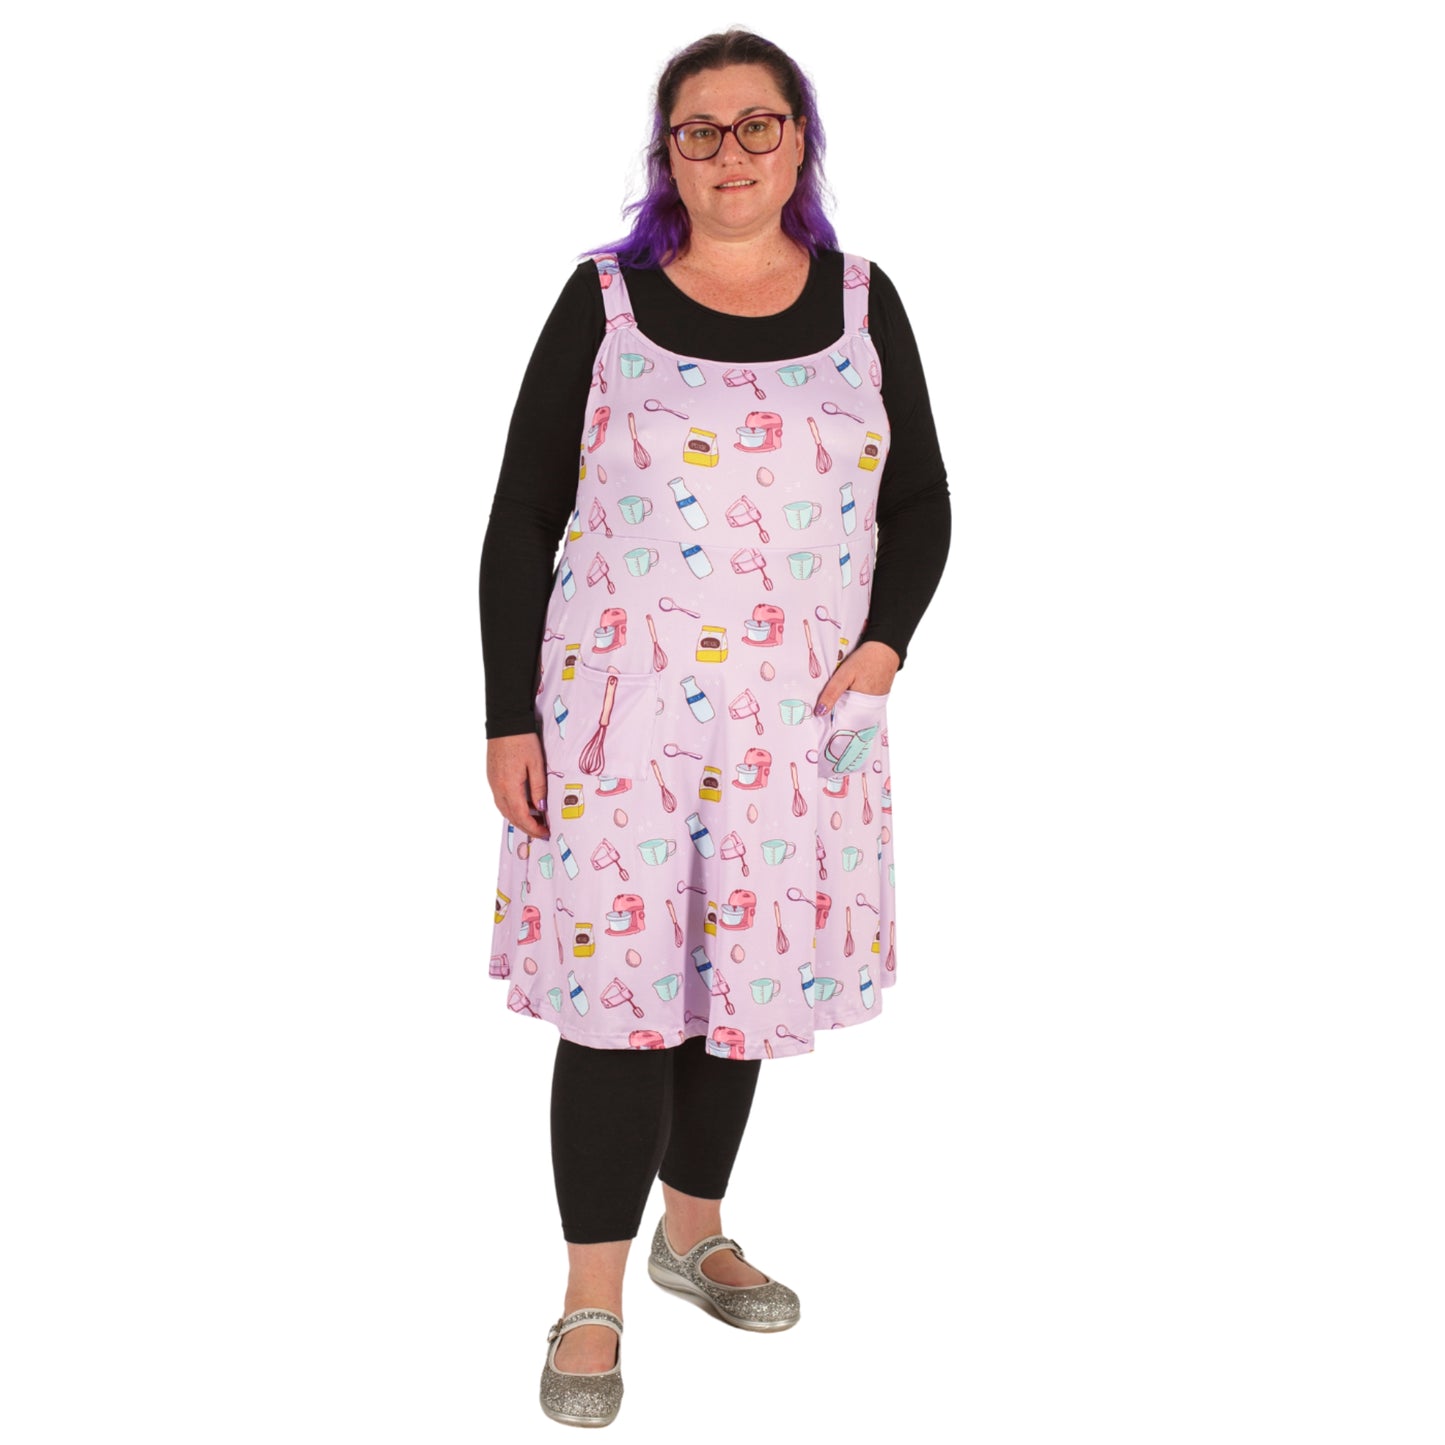 Bakery Pinafore by RainbowsAndFairies.com.au (Cooking - Whisk - Mixer - Dress With Pockets - Pinny - Kitsch - Rockabilly - Vintage Inspired) - SKU: CL_PFORE_BAKER_ORG - Pic-04